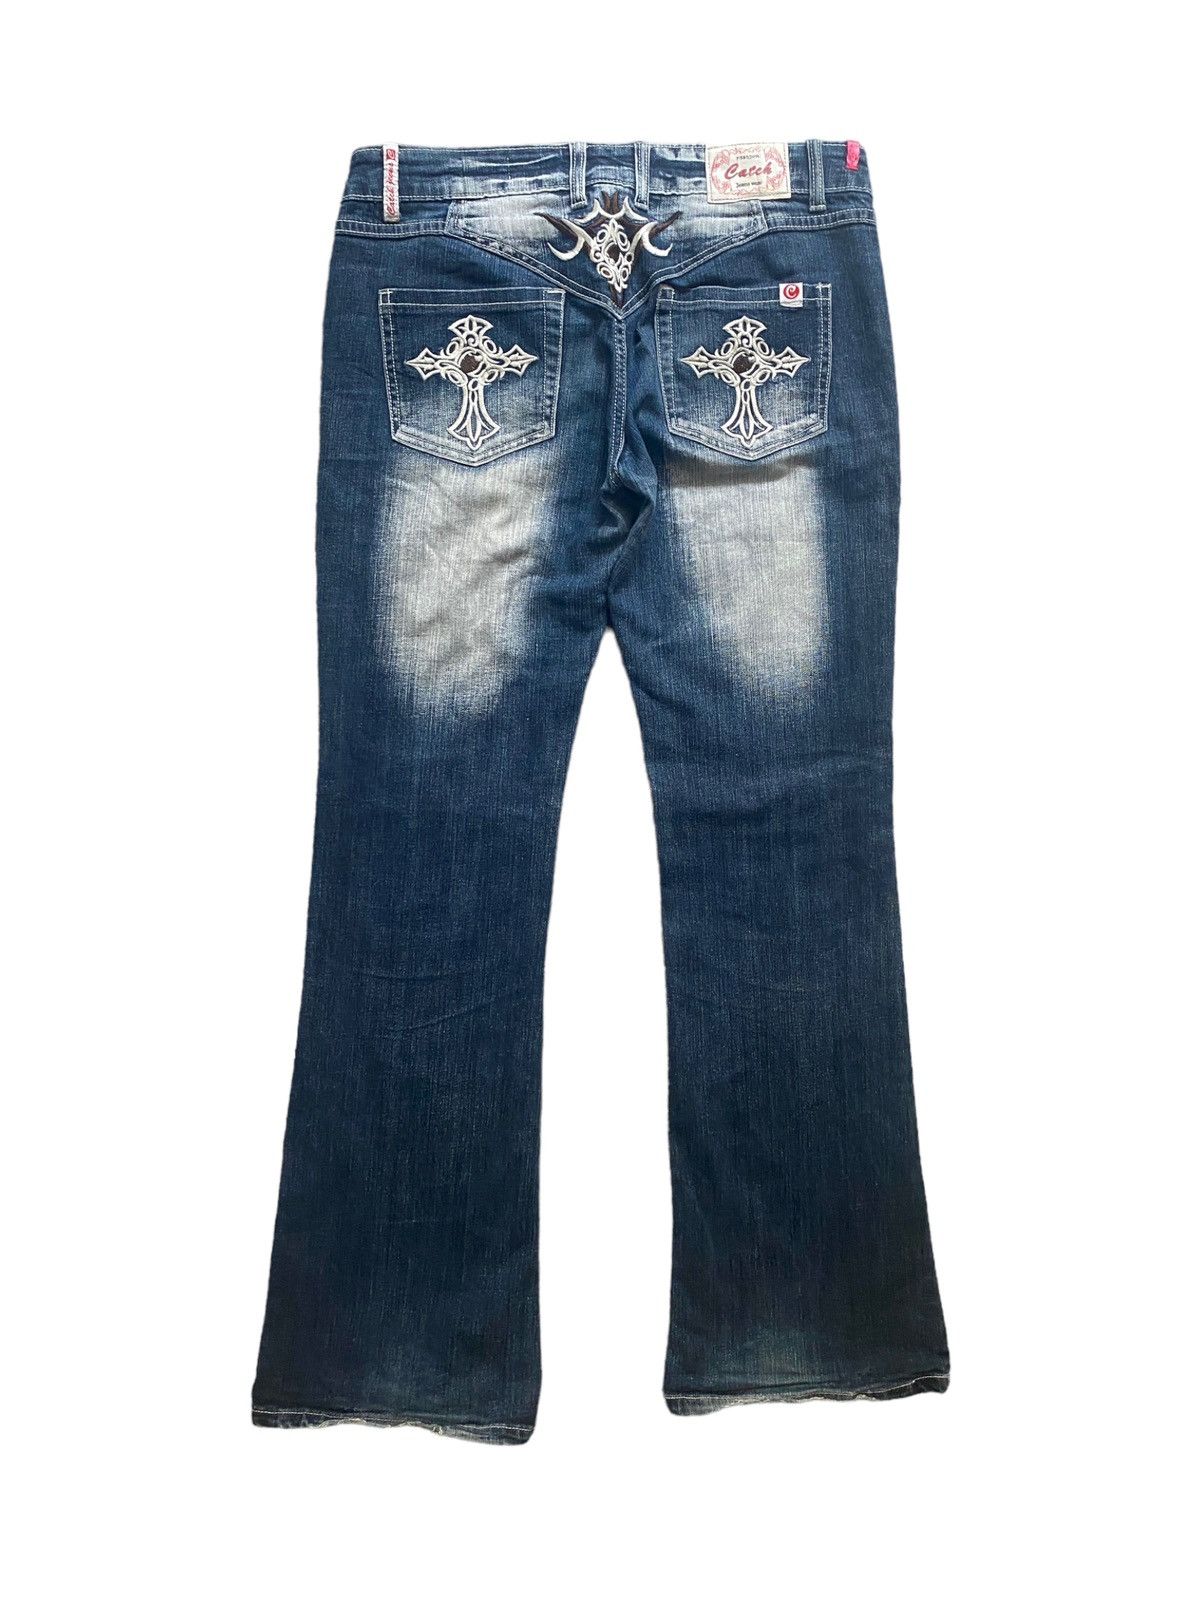 Affliction Y2k avant garde catch flared jeans | Grailed